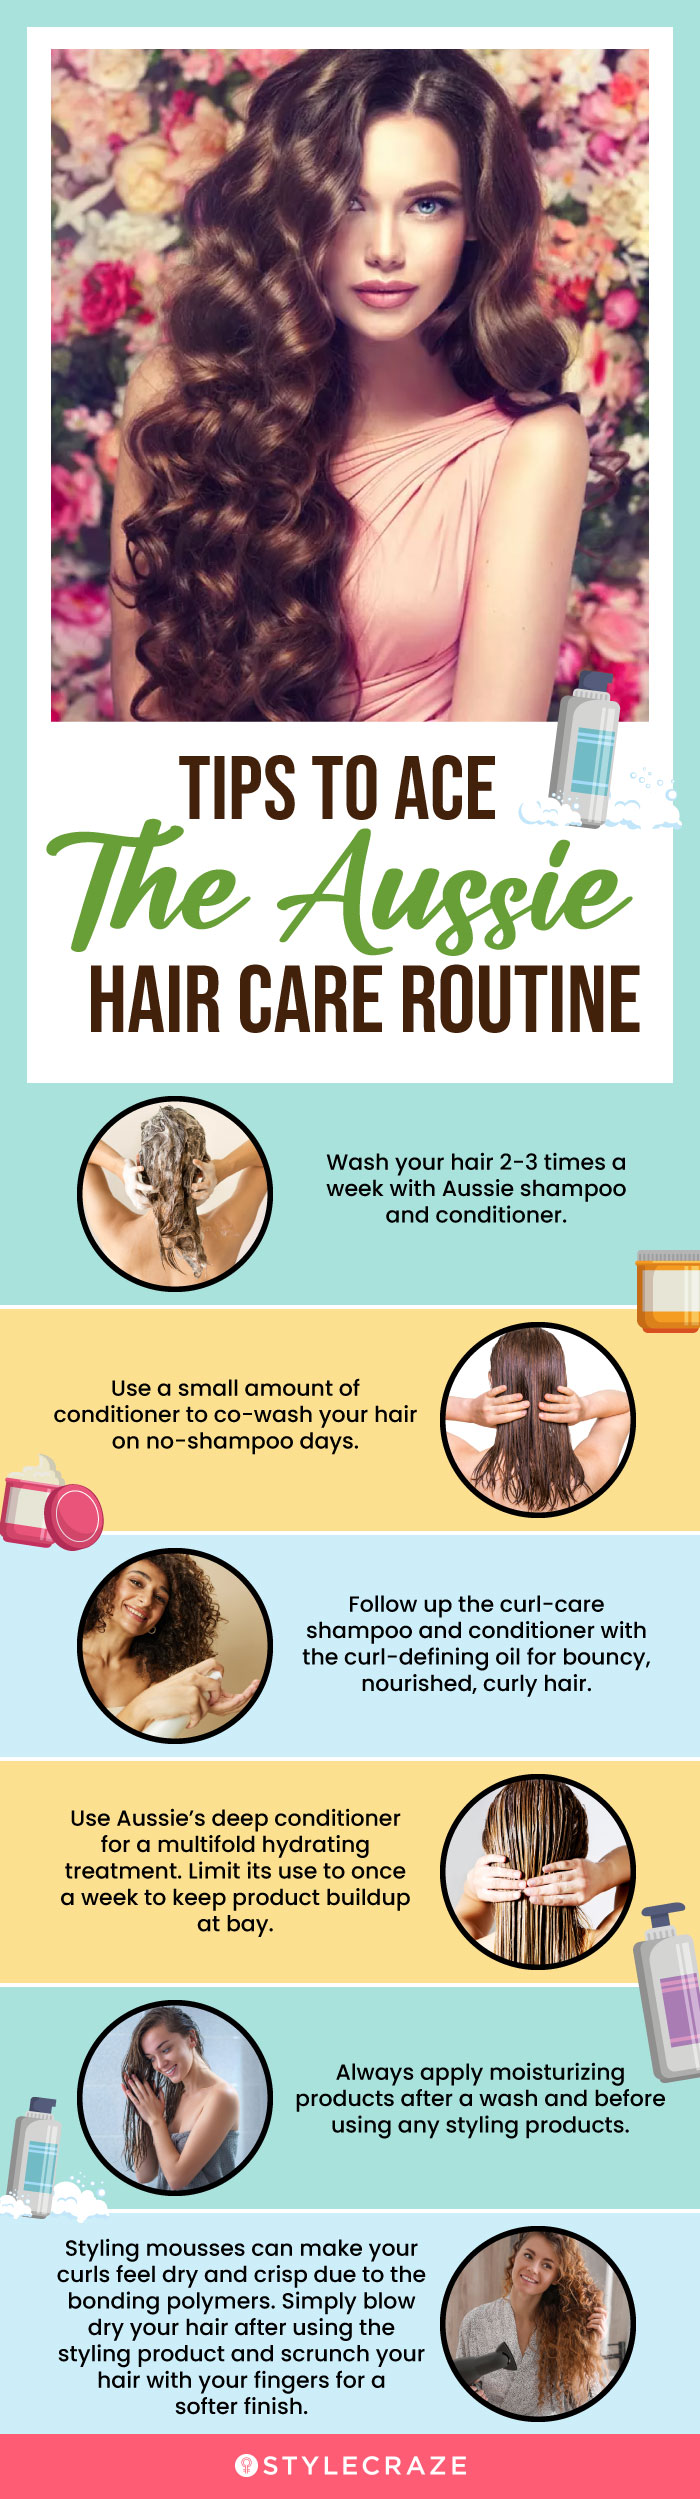 Tips To Ace The Aussie Hair Care Routine (infographic)